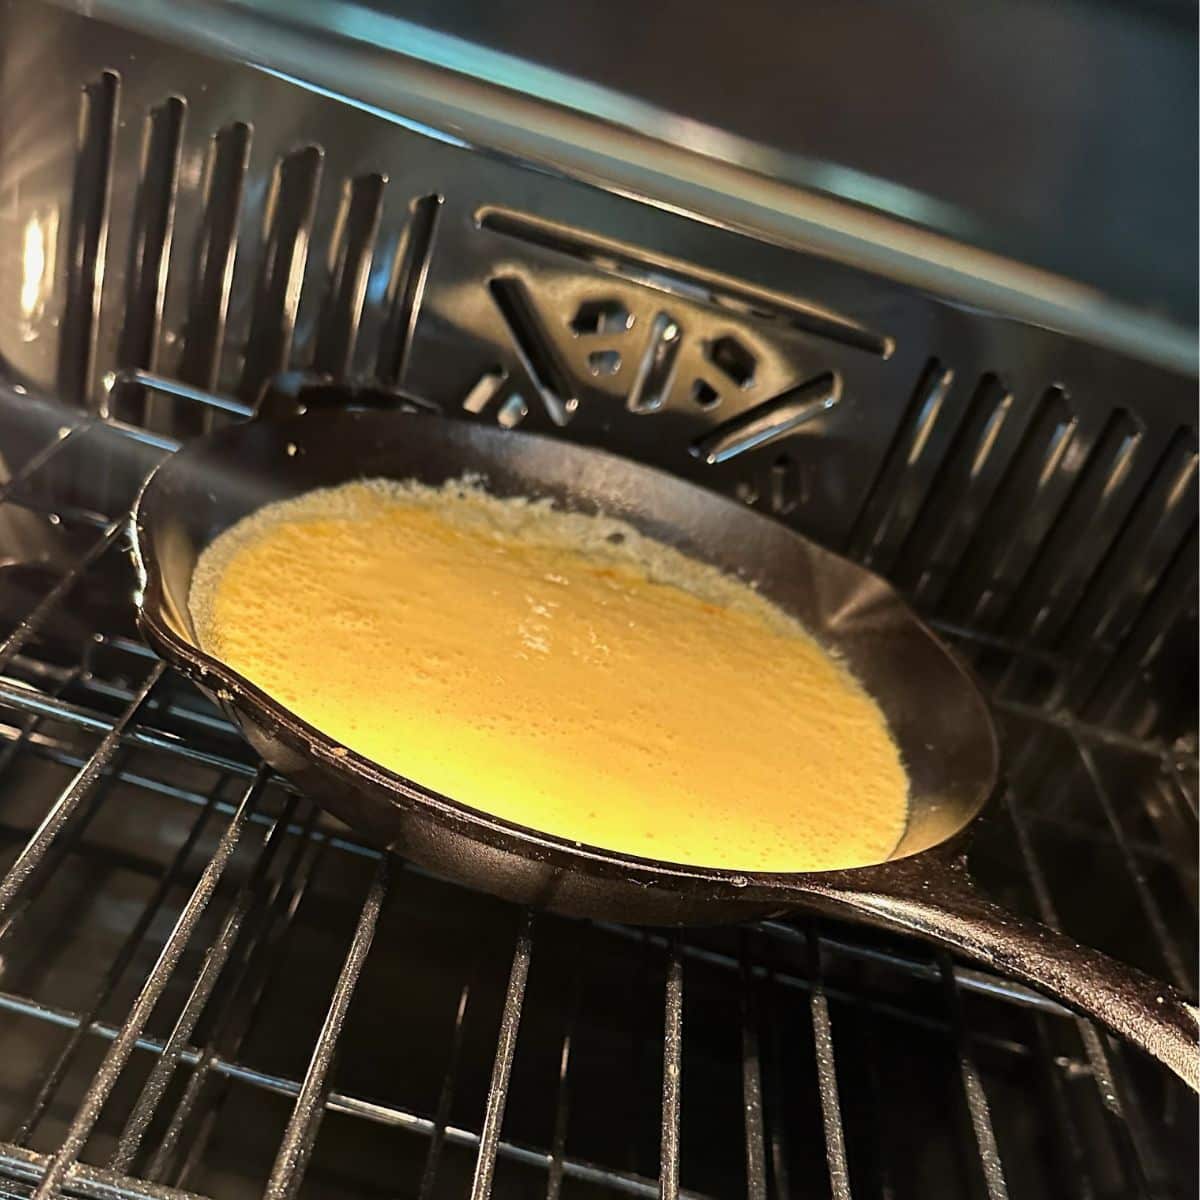 The pan with pancake batter in the oven.